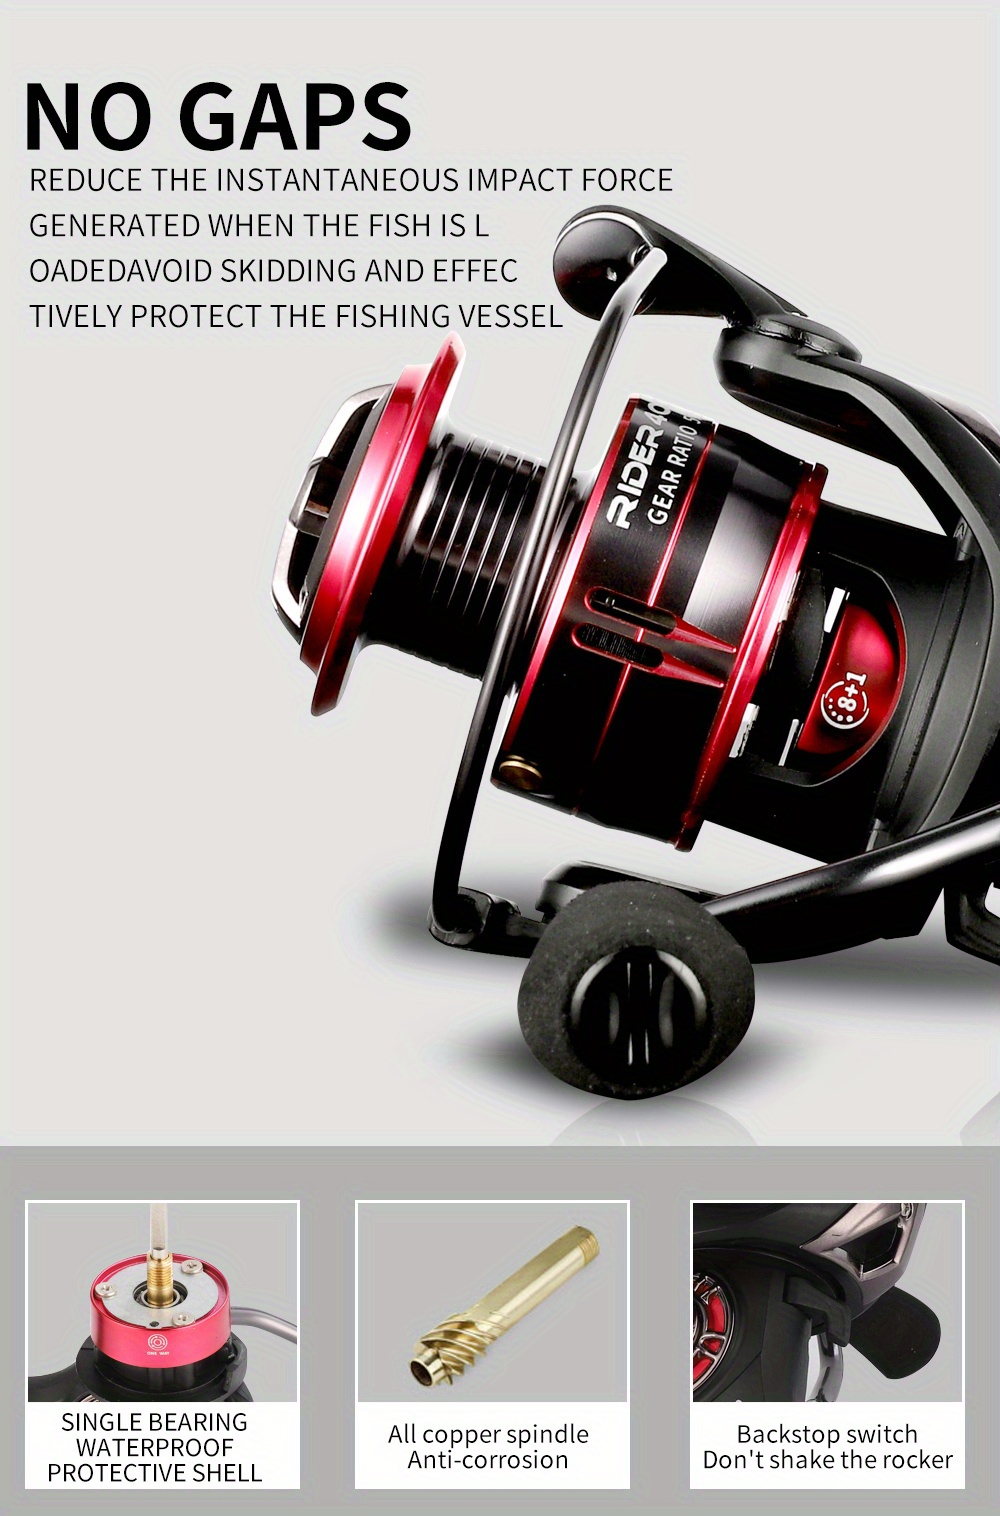 Lipstore Fishing Powerful 5.2: 1 / 4.4: 1 Gear Ratio 4 + 1bb Freshwater 4000 5.2:1 Other 4000 5.2:1